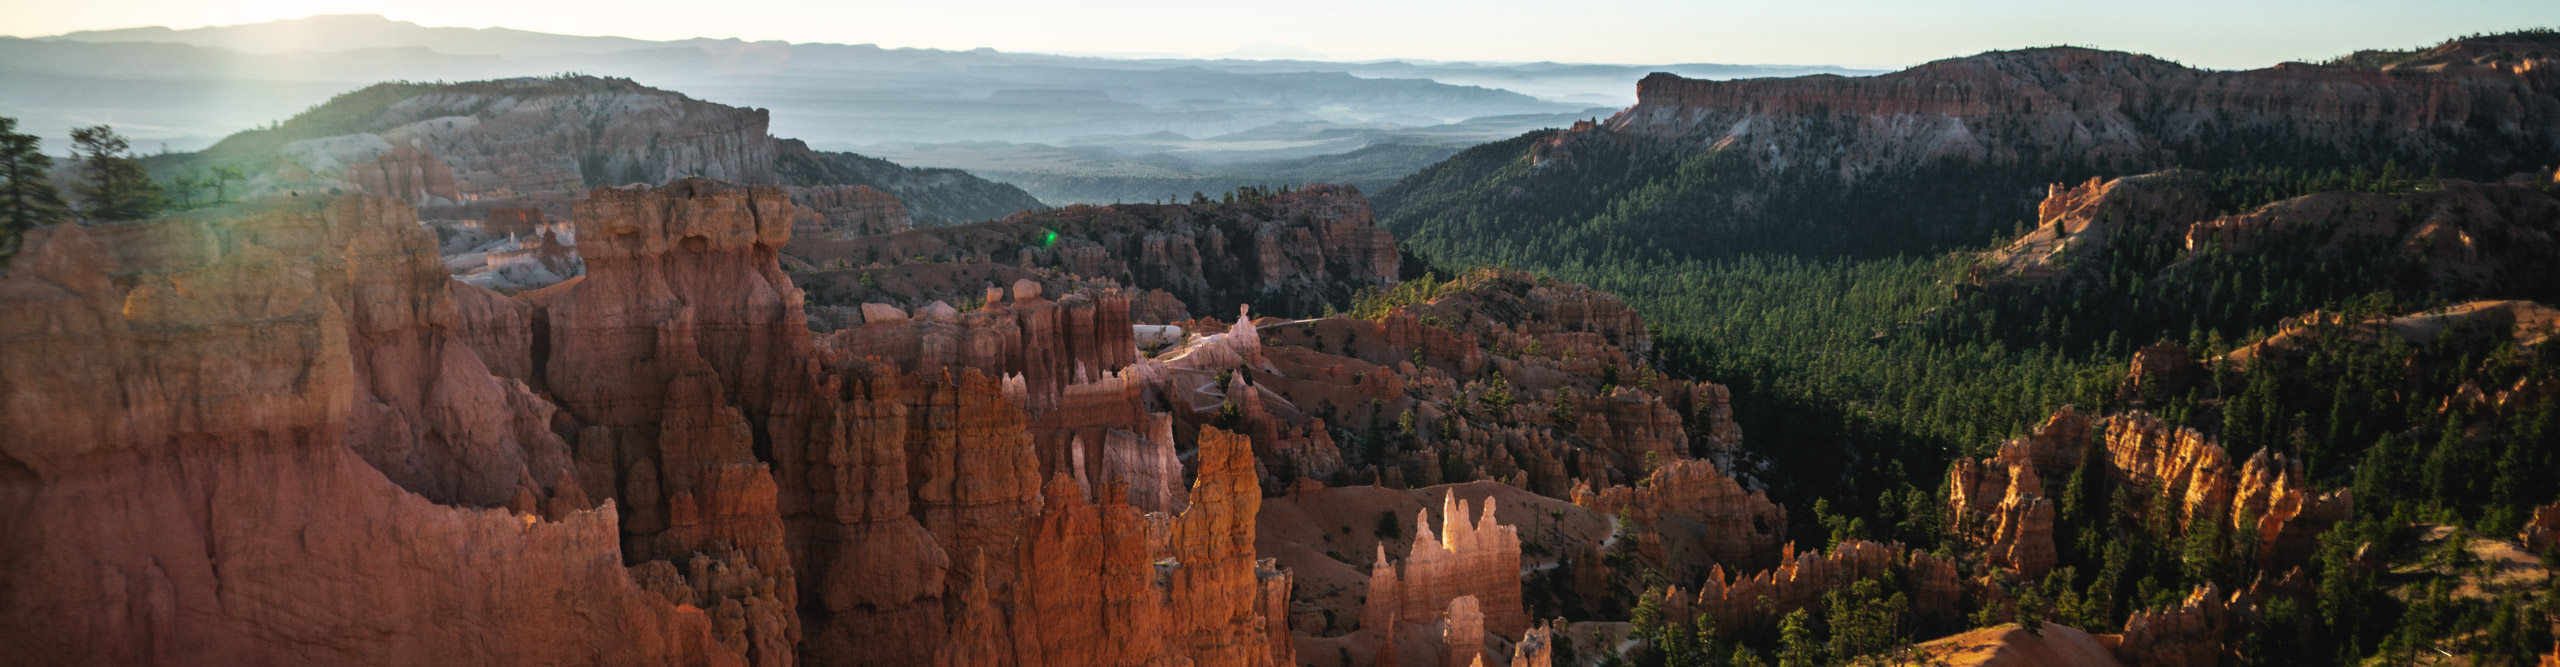 Sunset over the spiky orange rock formations on a sunny day in Bryce Canyon, Utah, USA